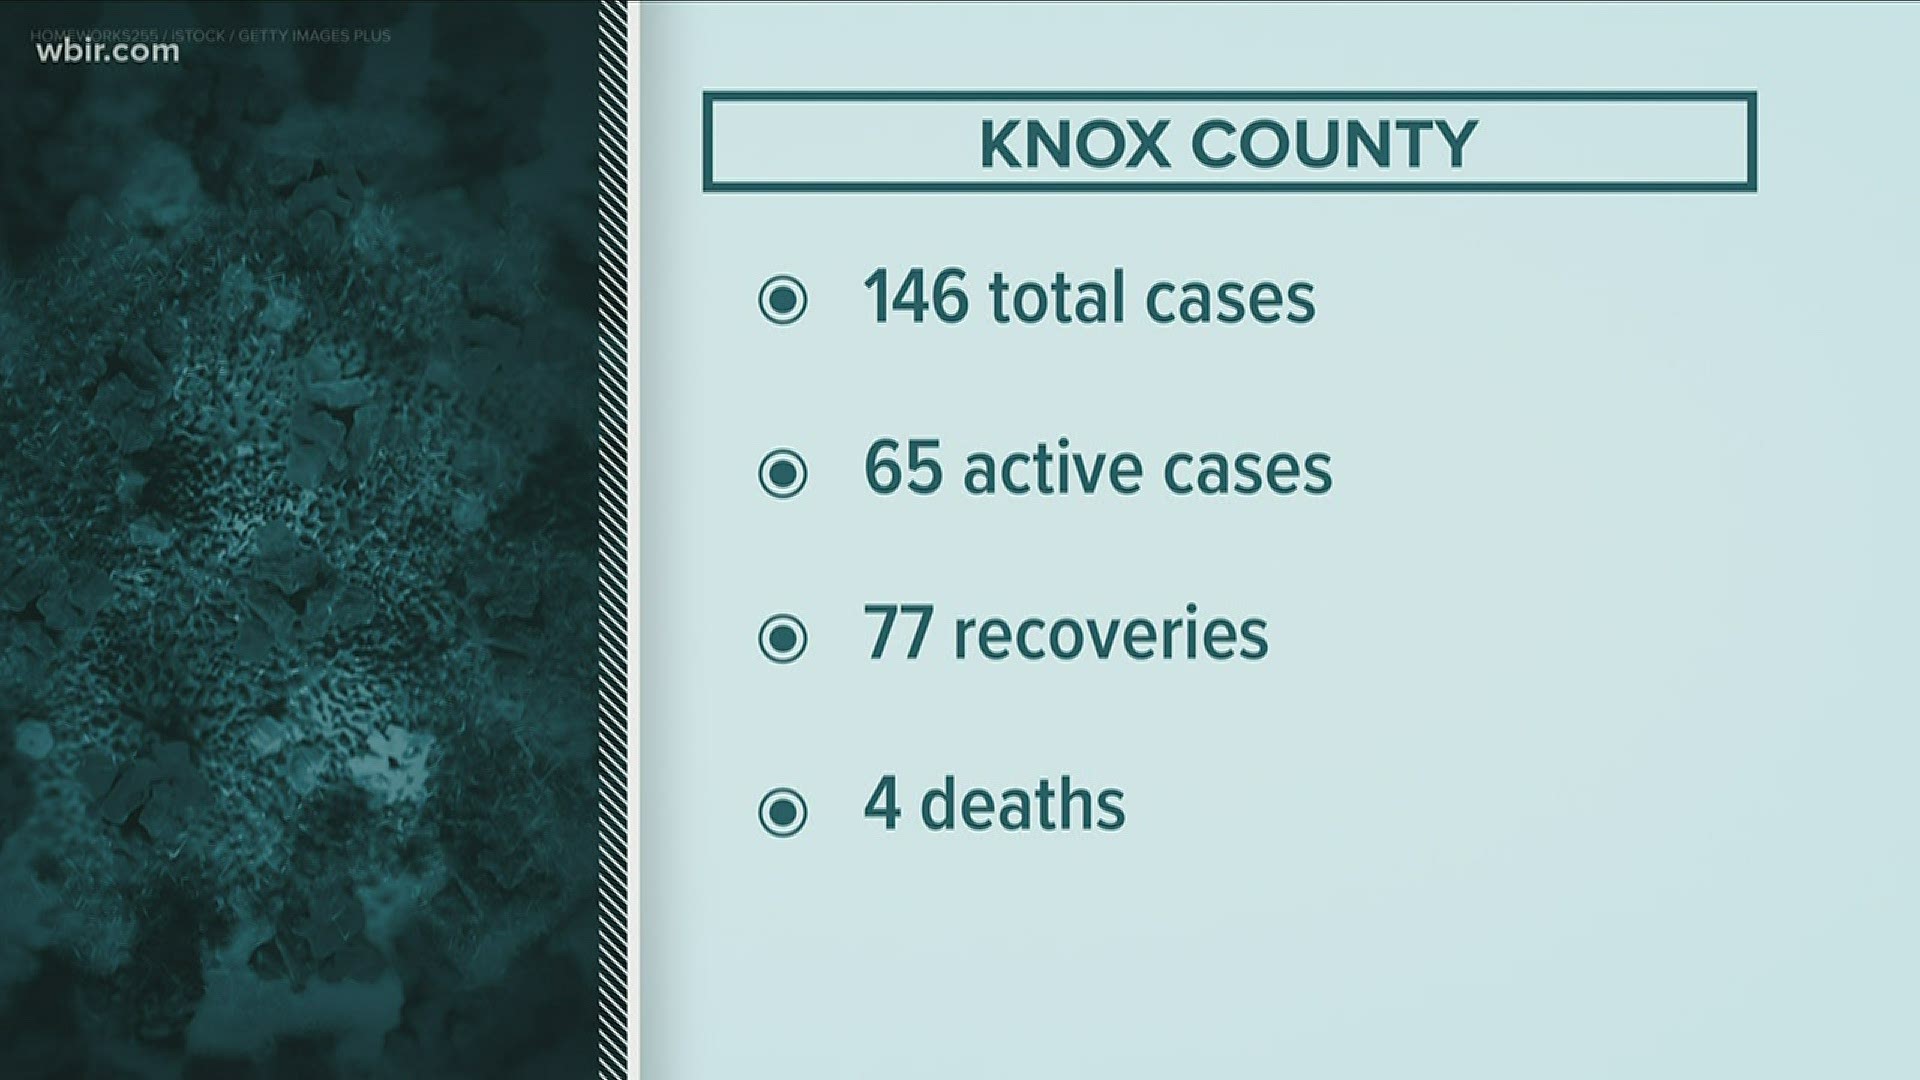 There have been 4 COVID-19 deaths in Knox County.